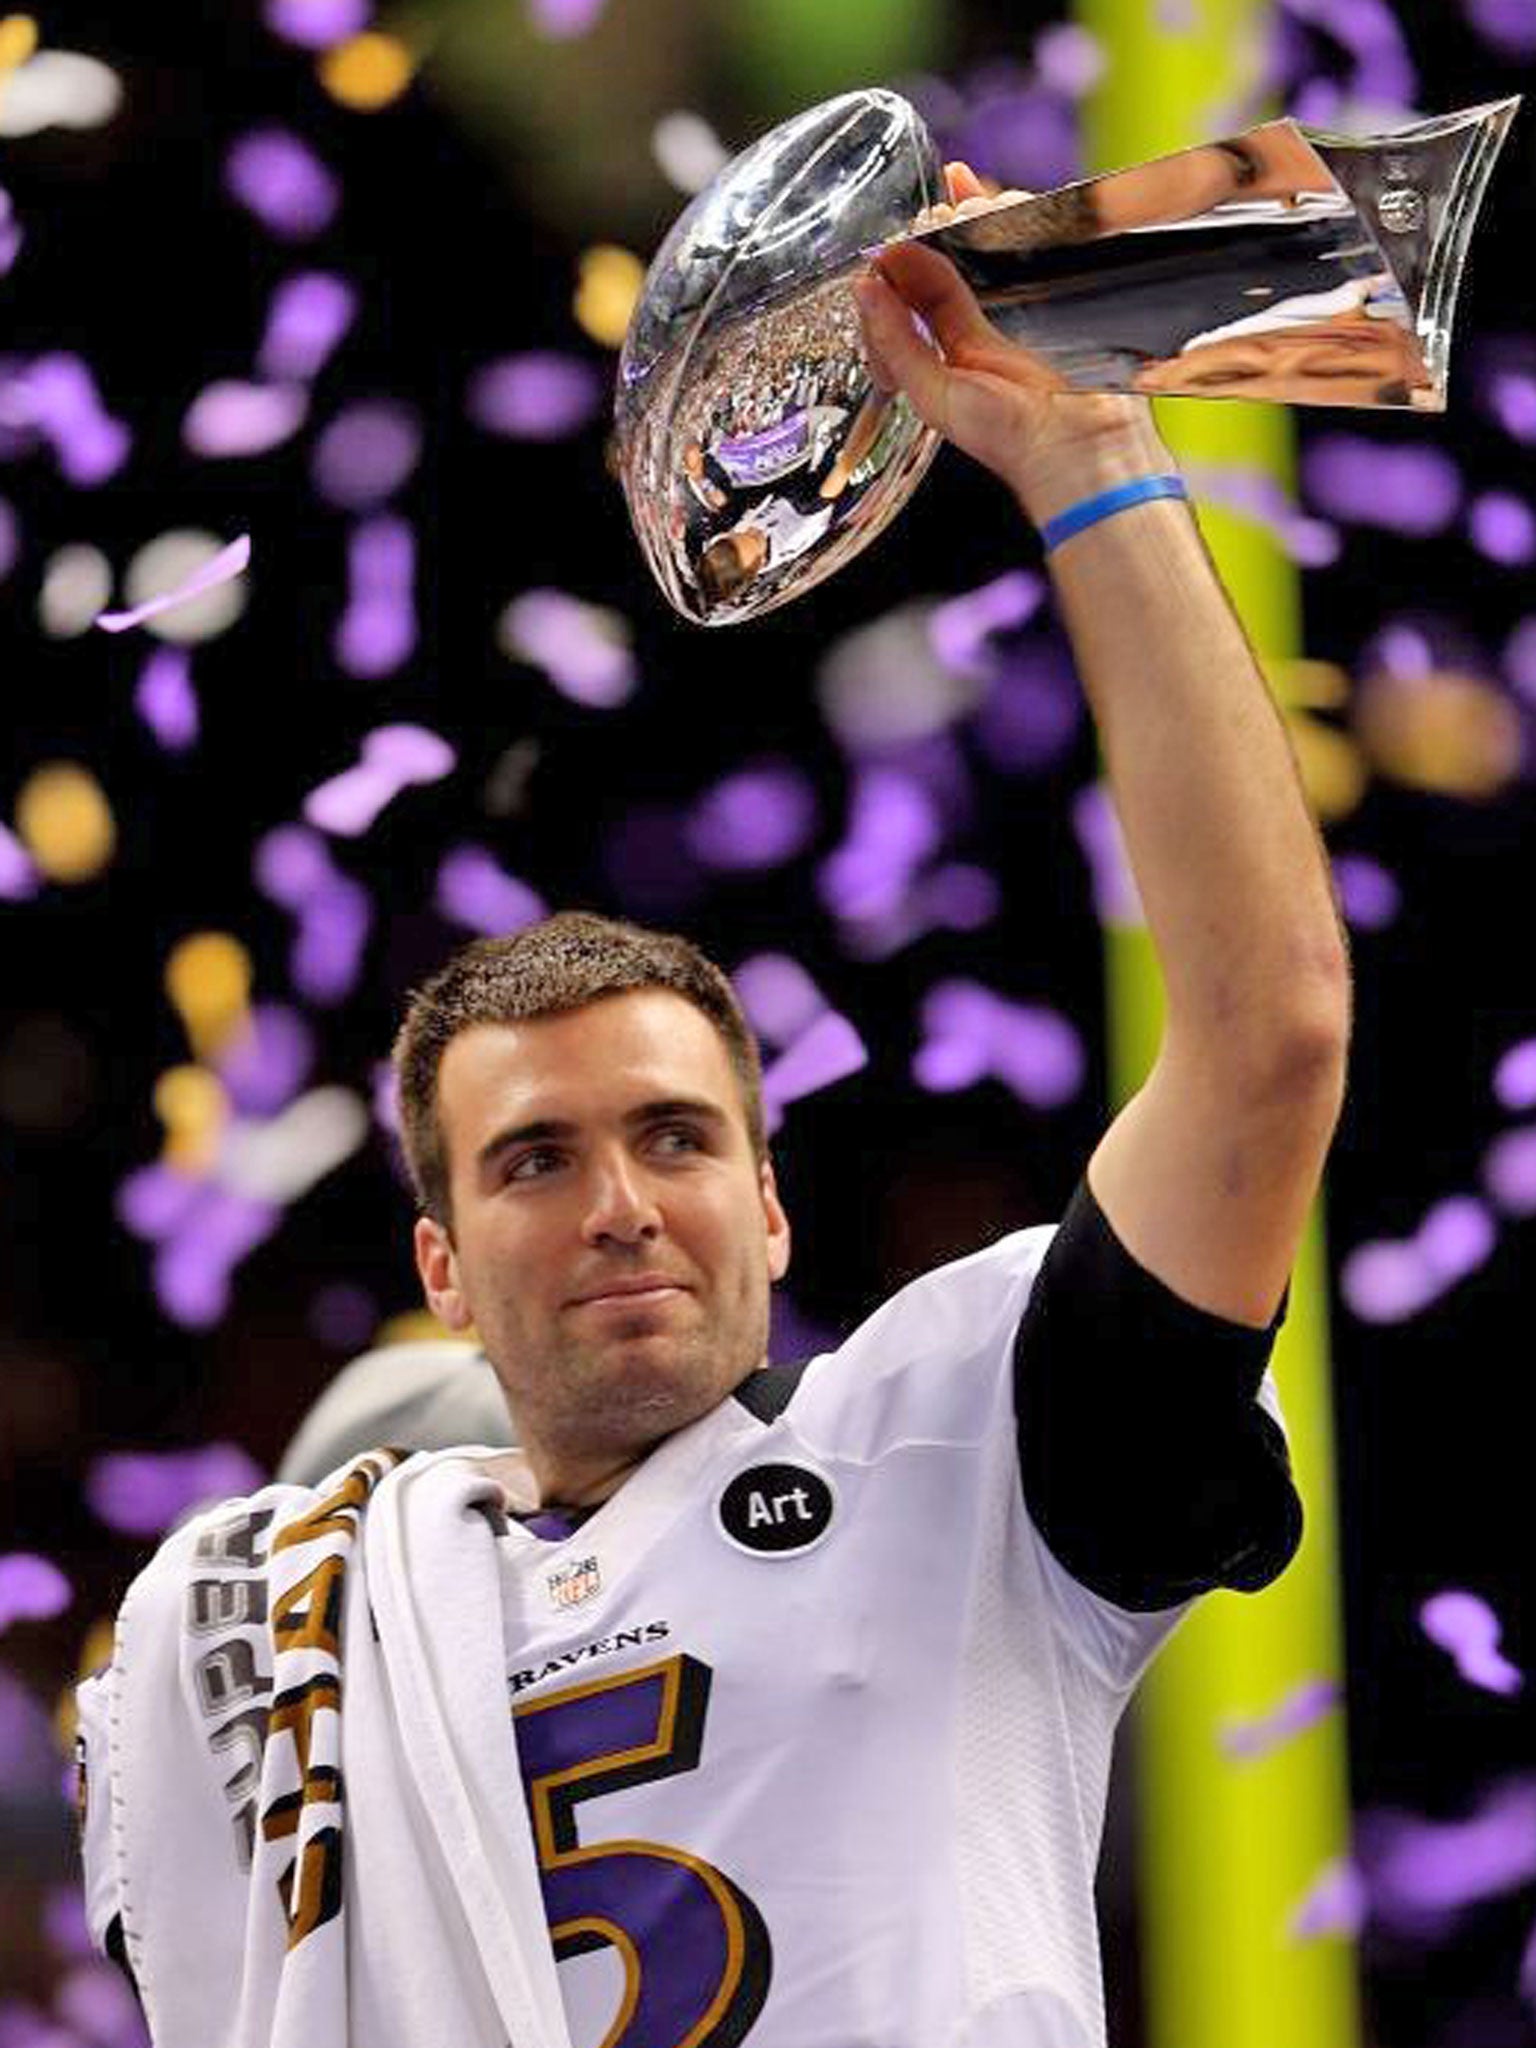 Baltimore quarterback Joe Flacco gets his hands on the Vince
Lombardi Trophy